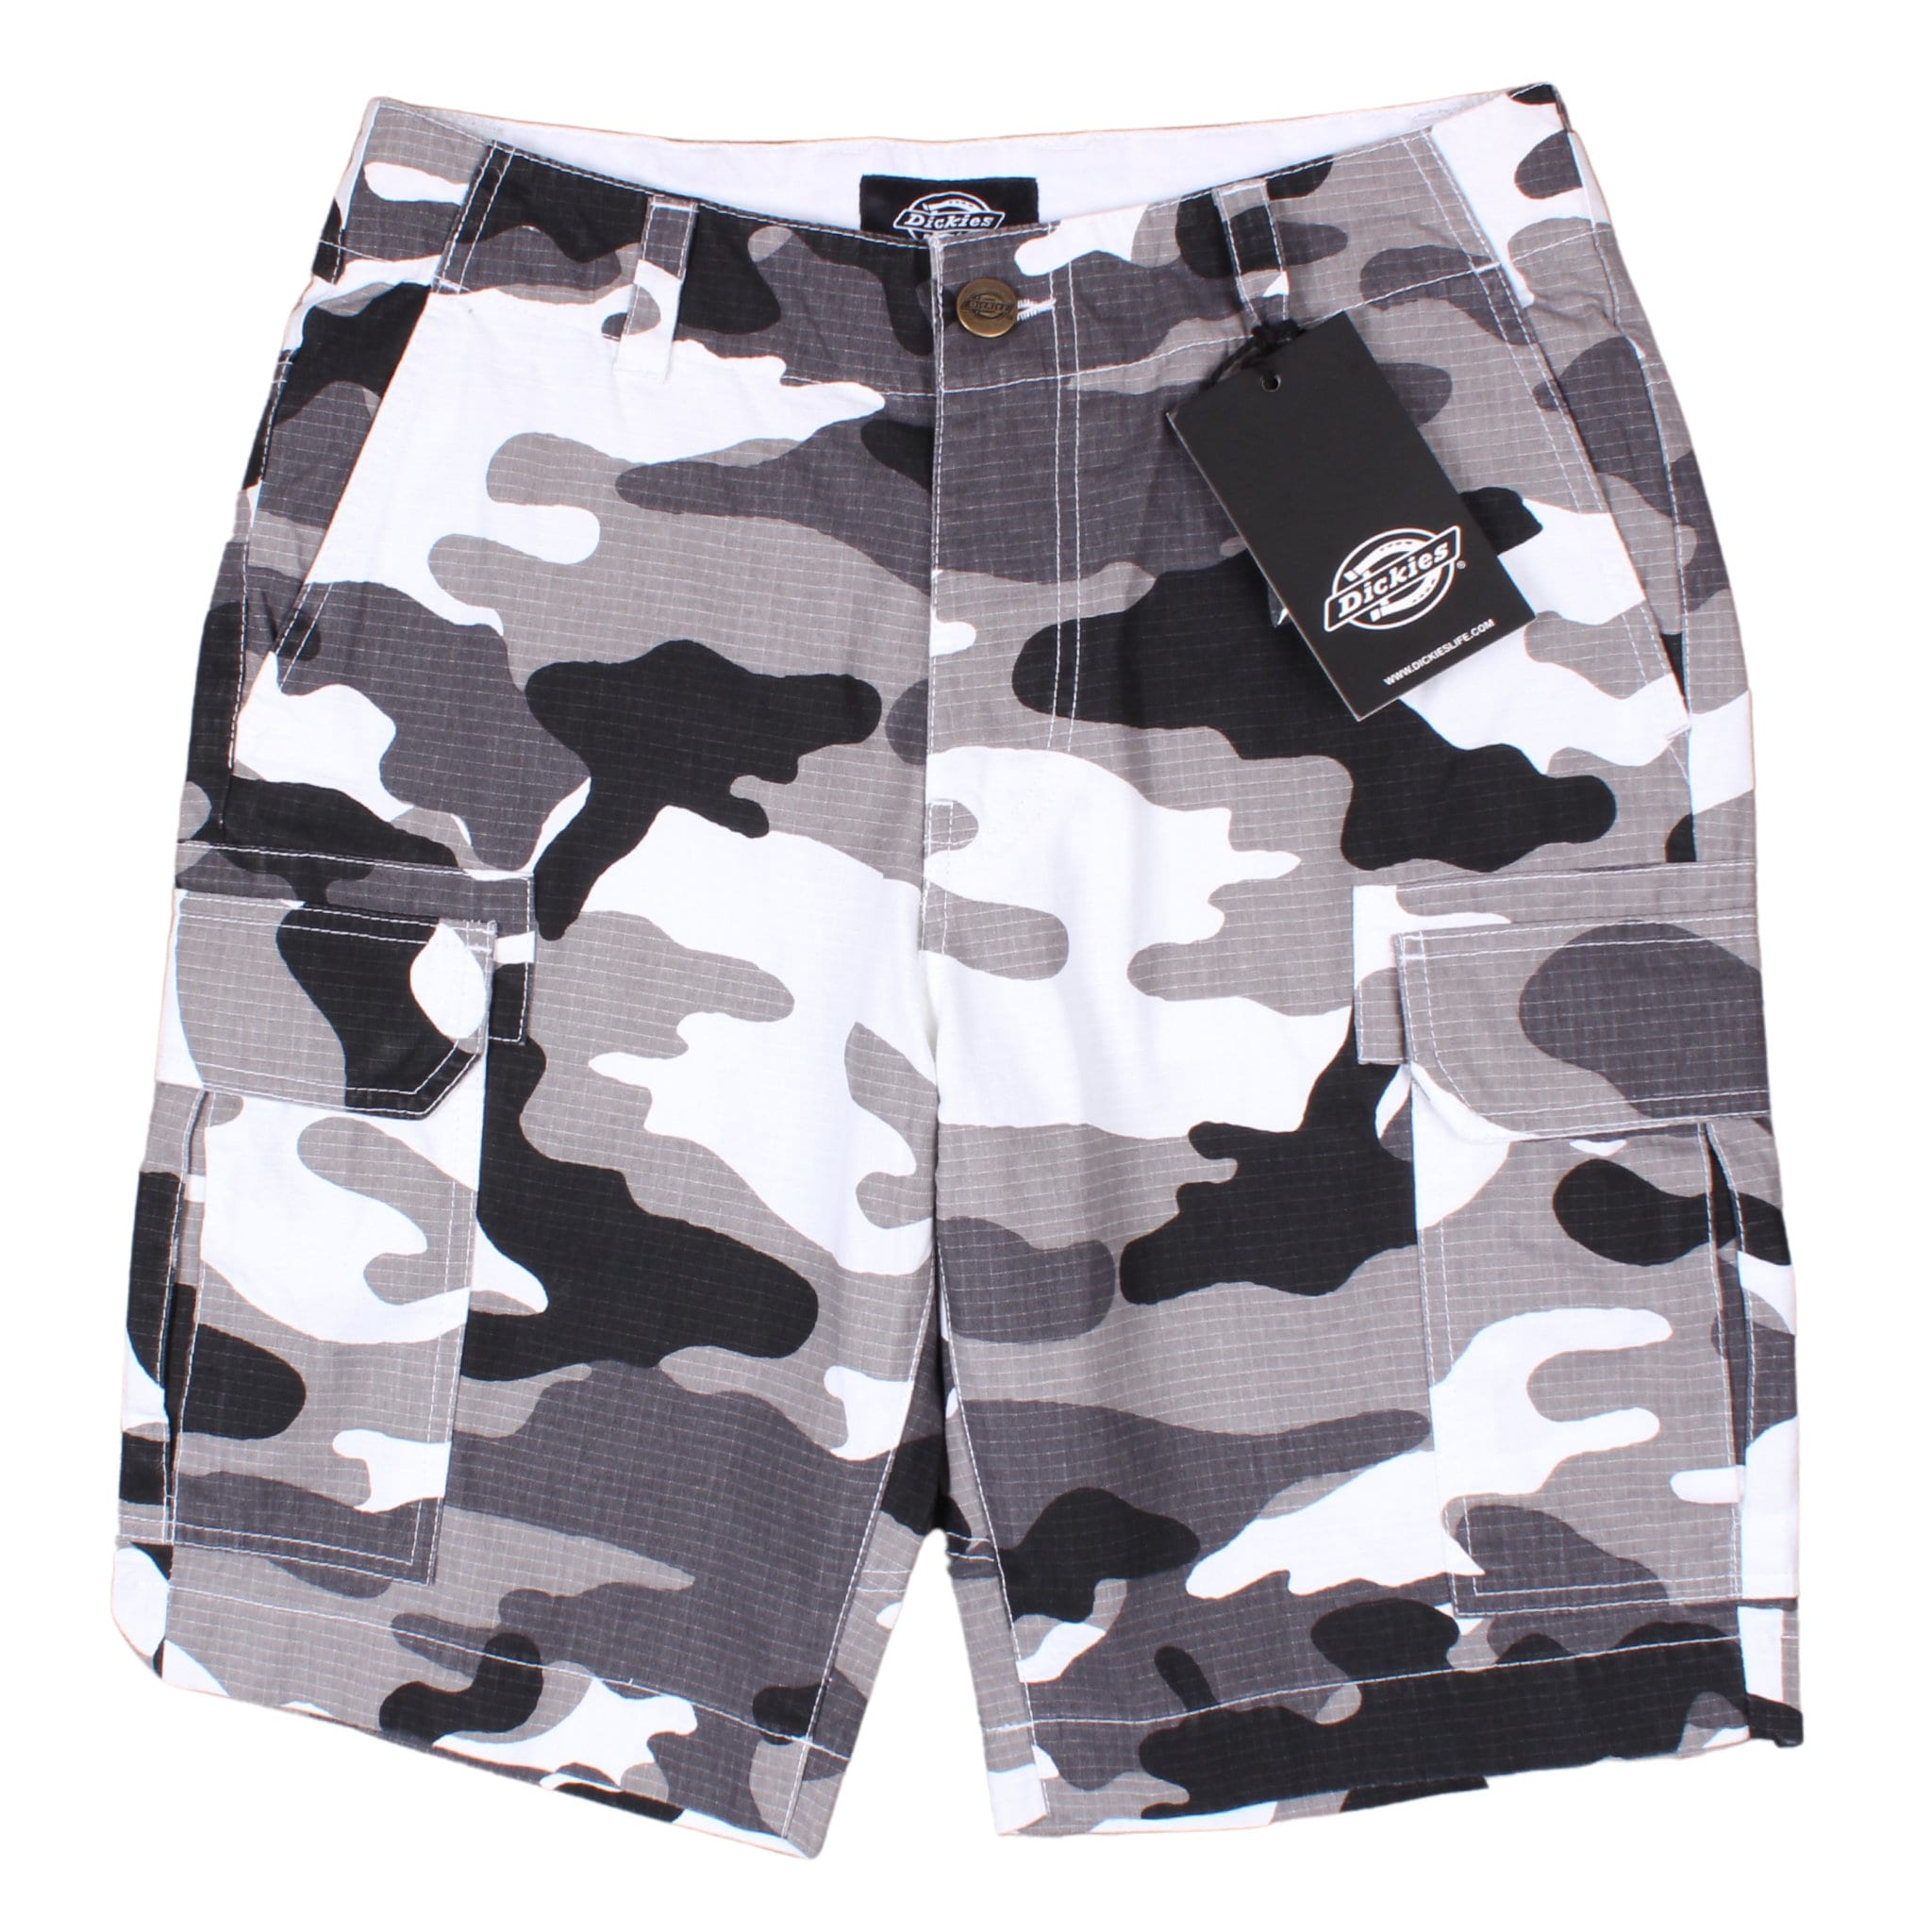 XIONG TAI Mens Short Cargo Short Belted Short Big and Tall Cargo Shorts for Men Summer Shorts Camouflage Shorts Size 30-42 